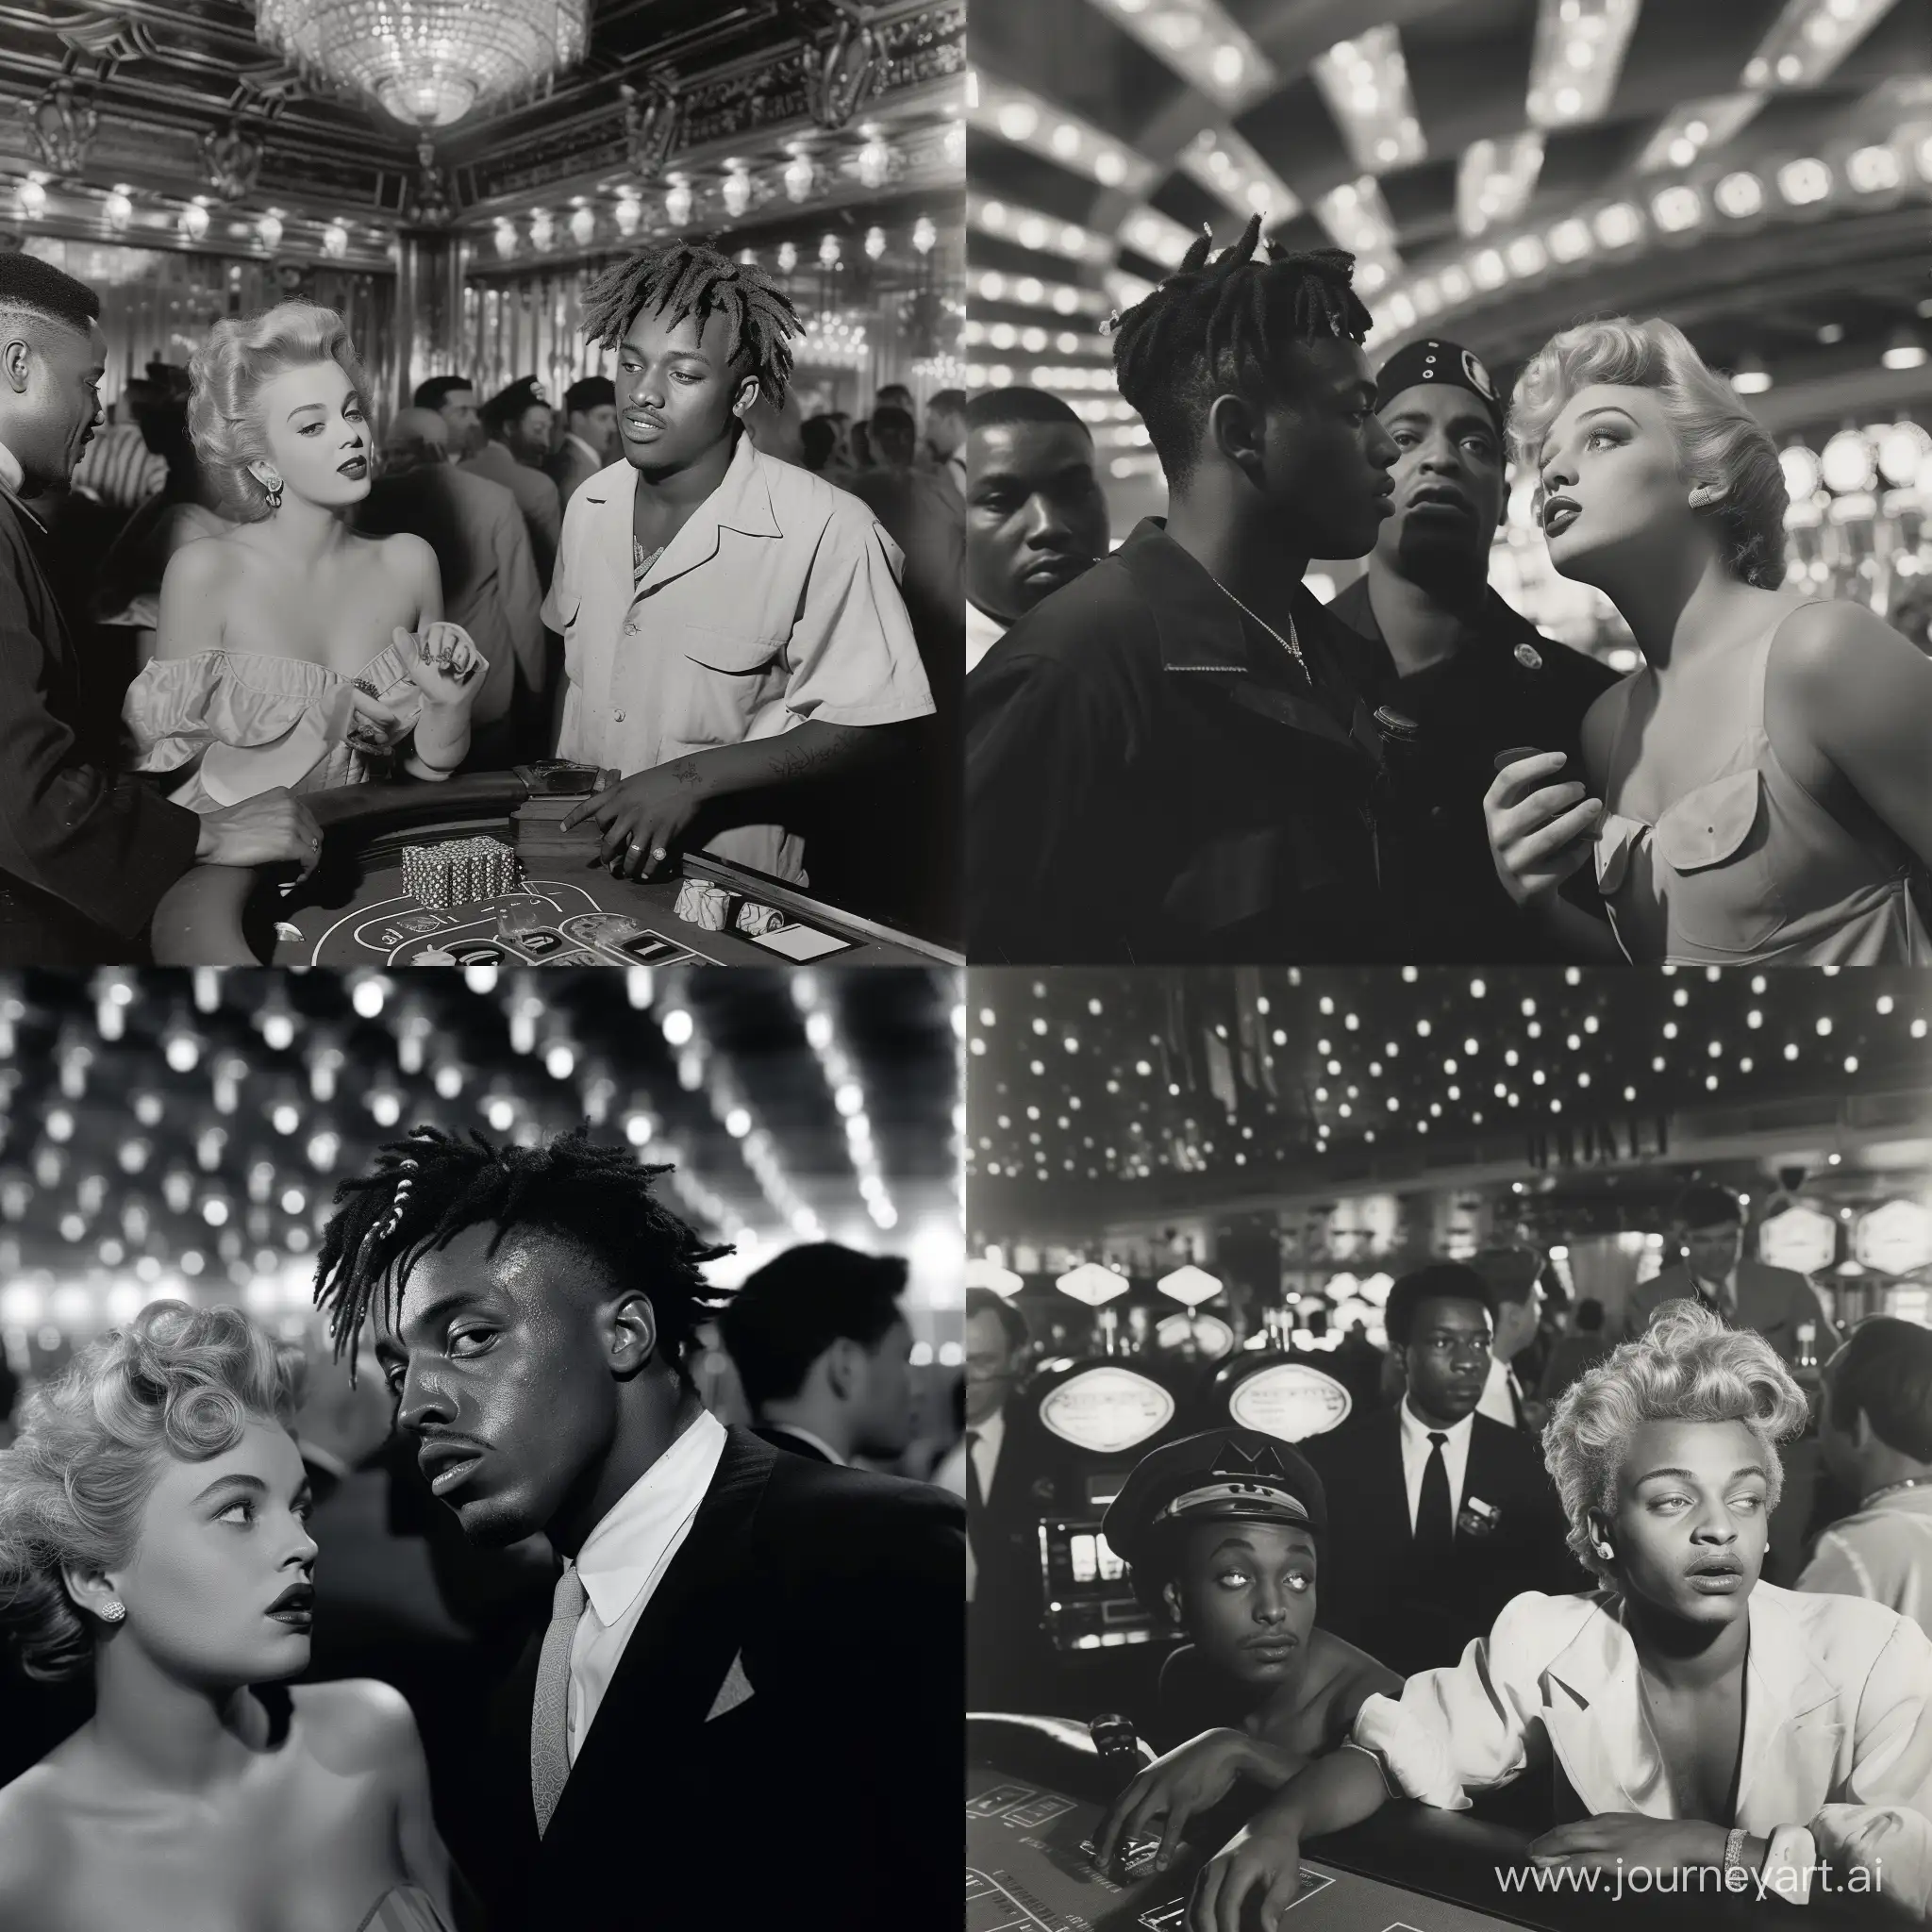 A 1950s Black and White Photograph,of Juice WRLD,in a Casino with Marilyn Monroe,With security.